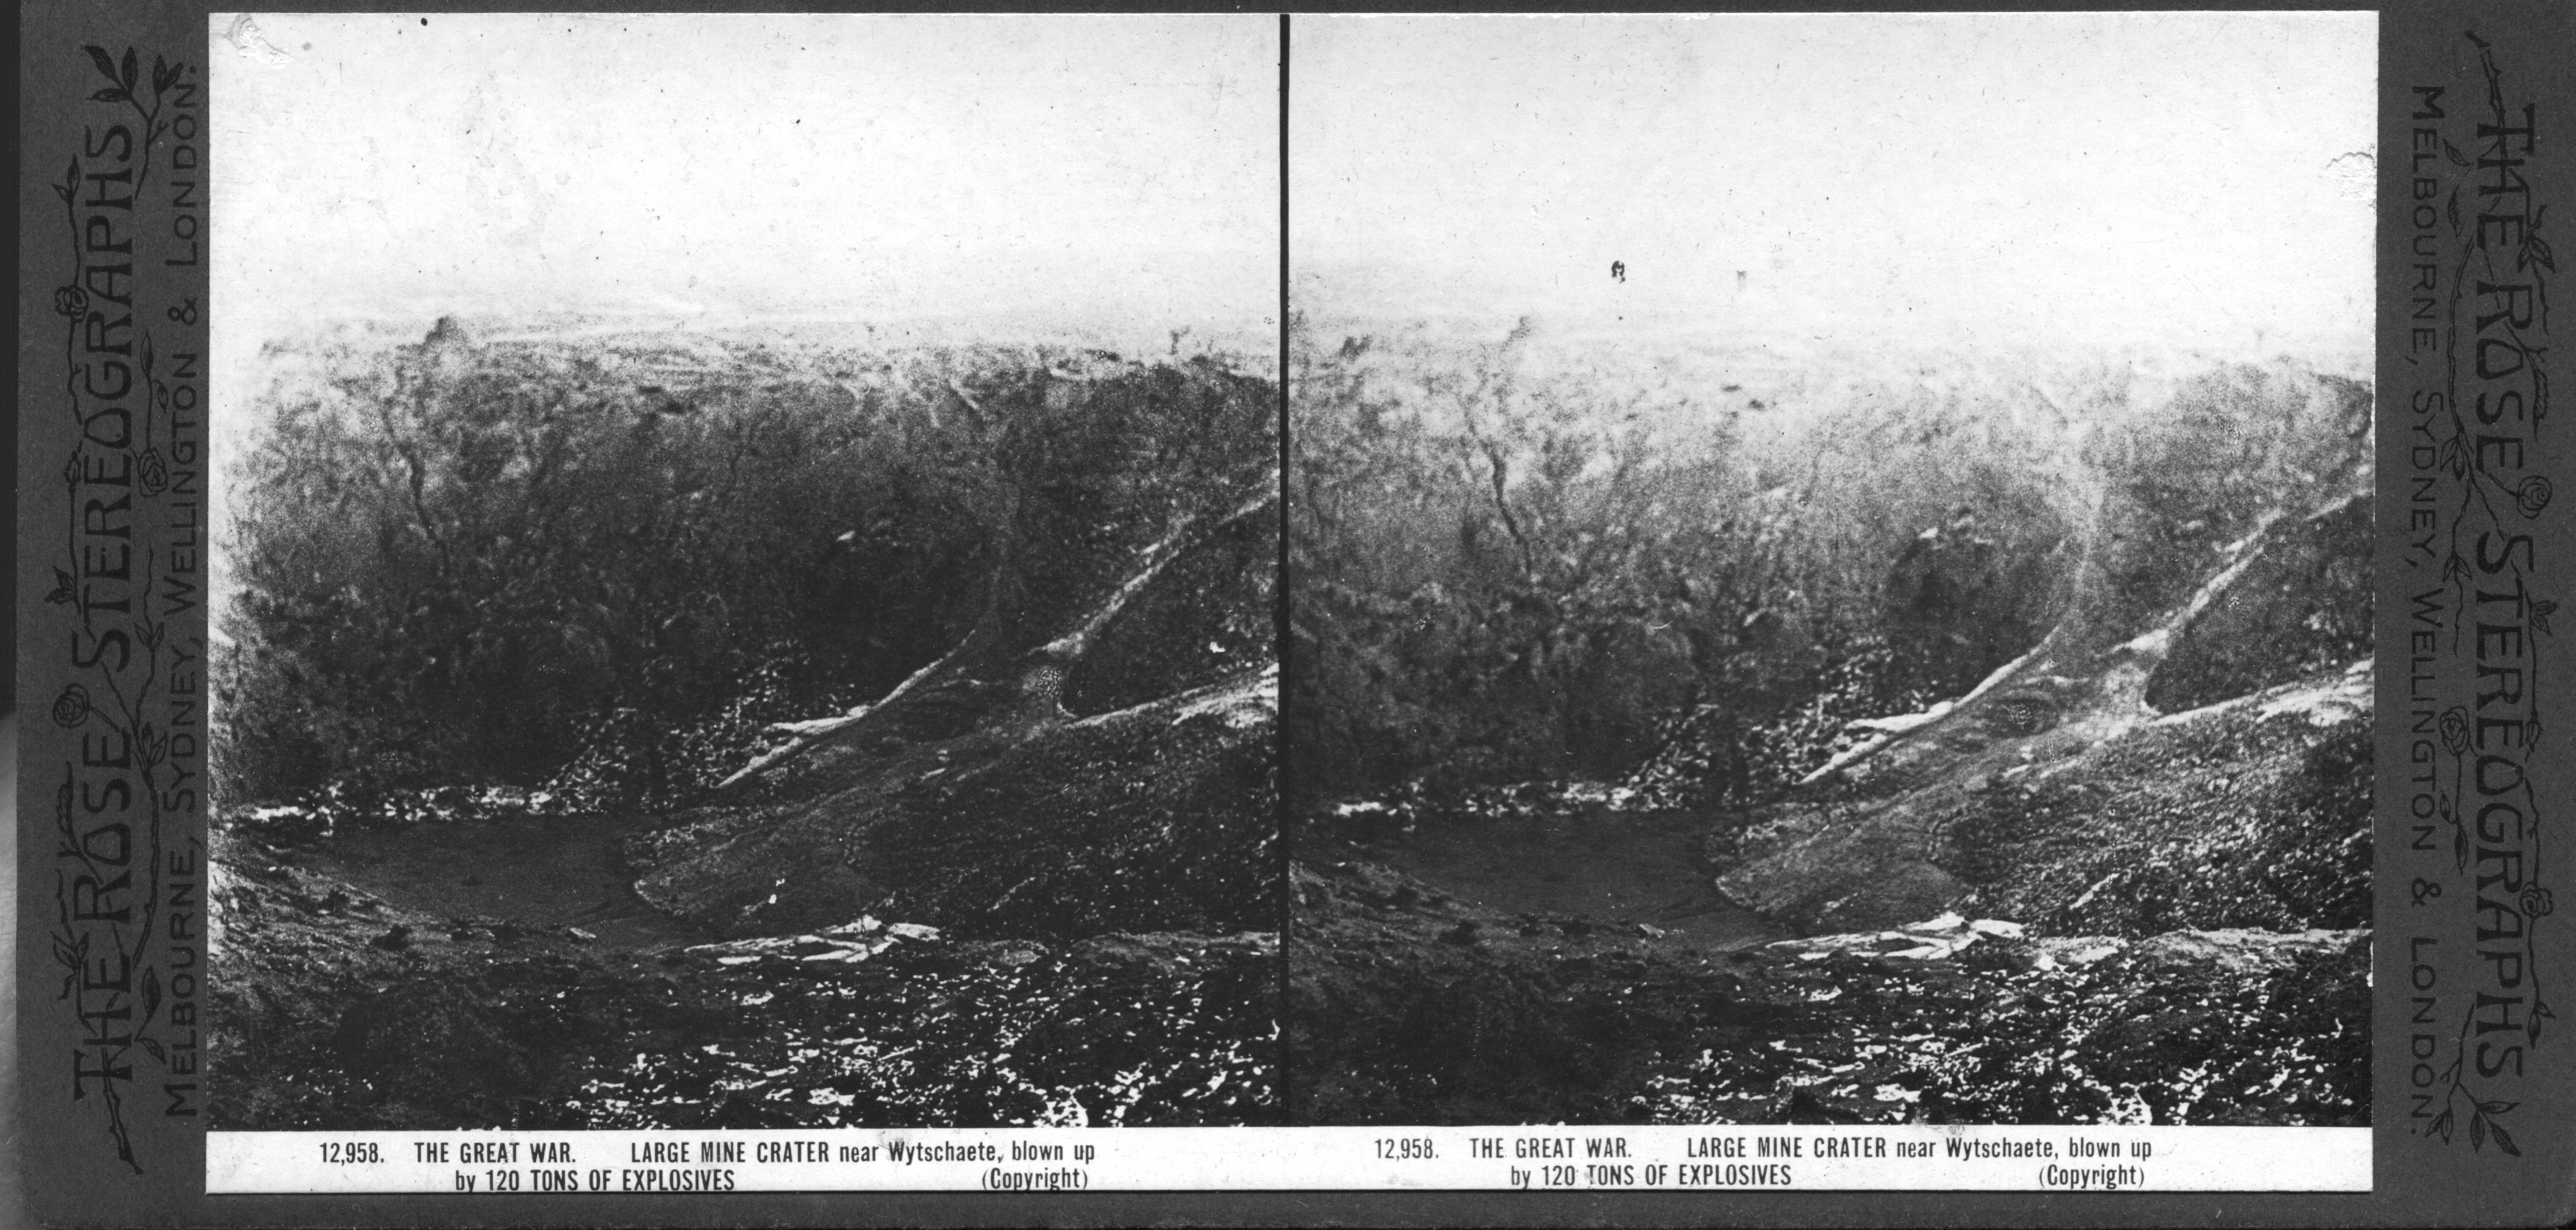 THE GREAT WAR. LARGE MINE CRATER near Wytschaete, blown up by 120 TONS OF EXPLOSIVES